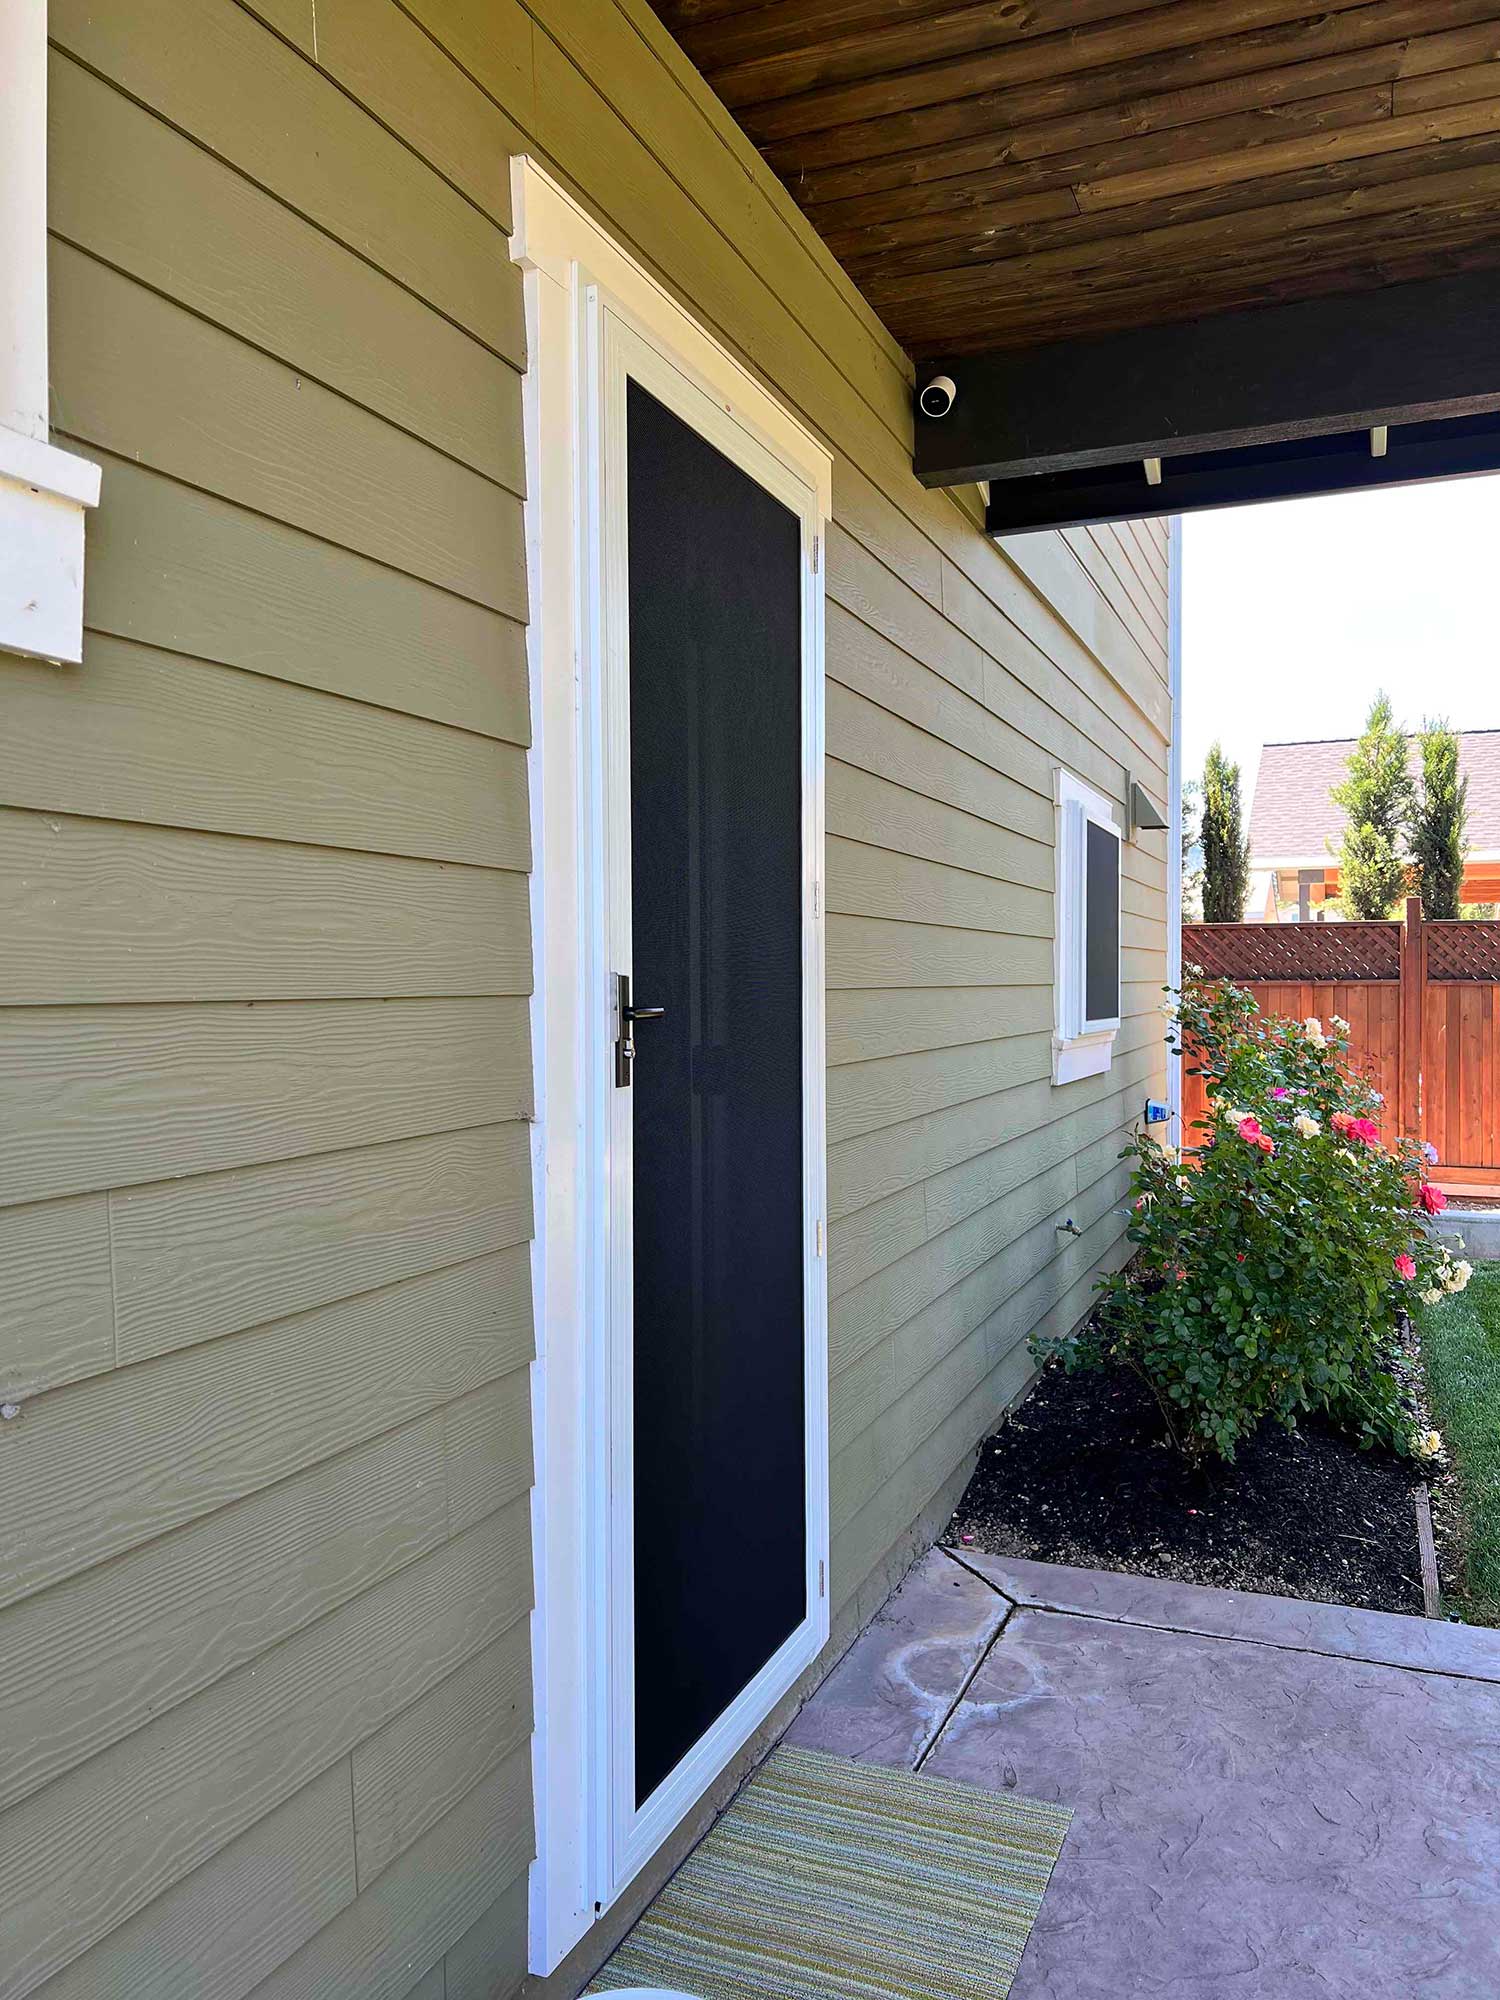 Crimsafe Security screen doors added to this Middletown, CA home by ClimatePro